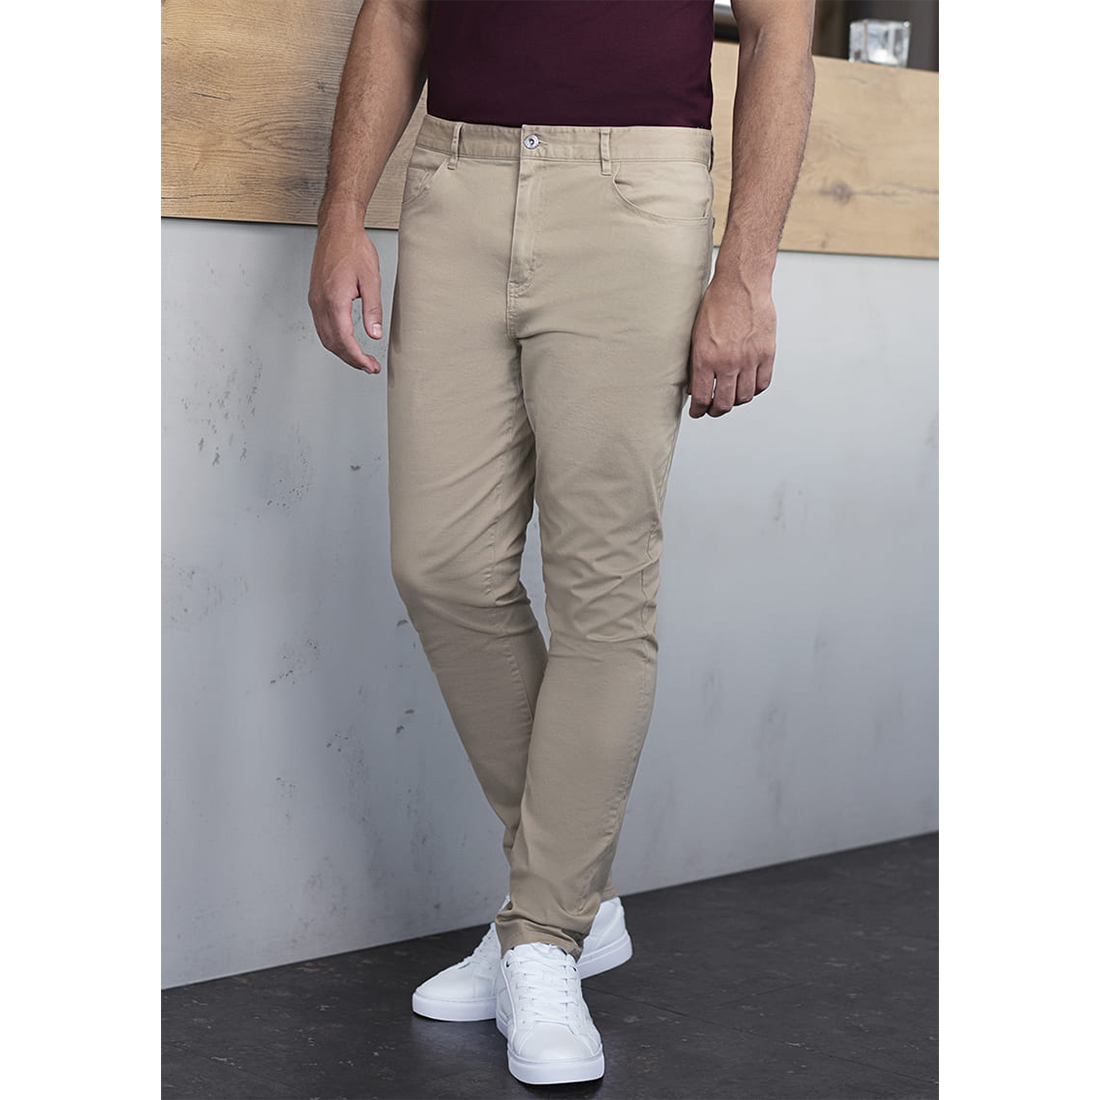 Men's 5-Pocket Trousers Classic-Stretch - Safetywear